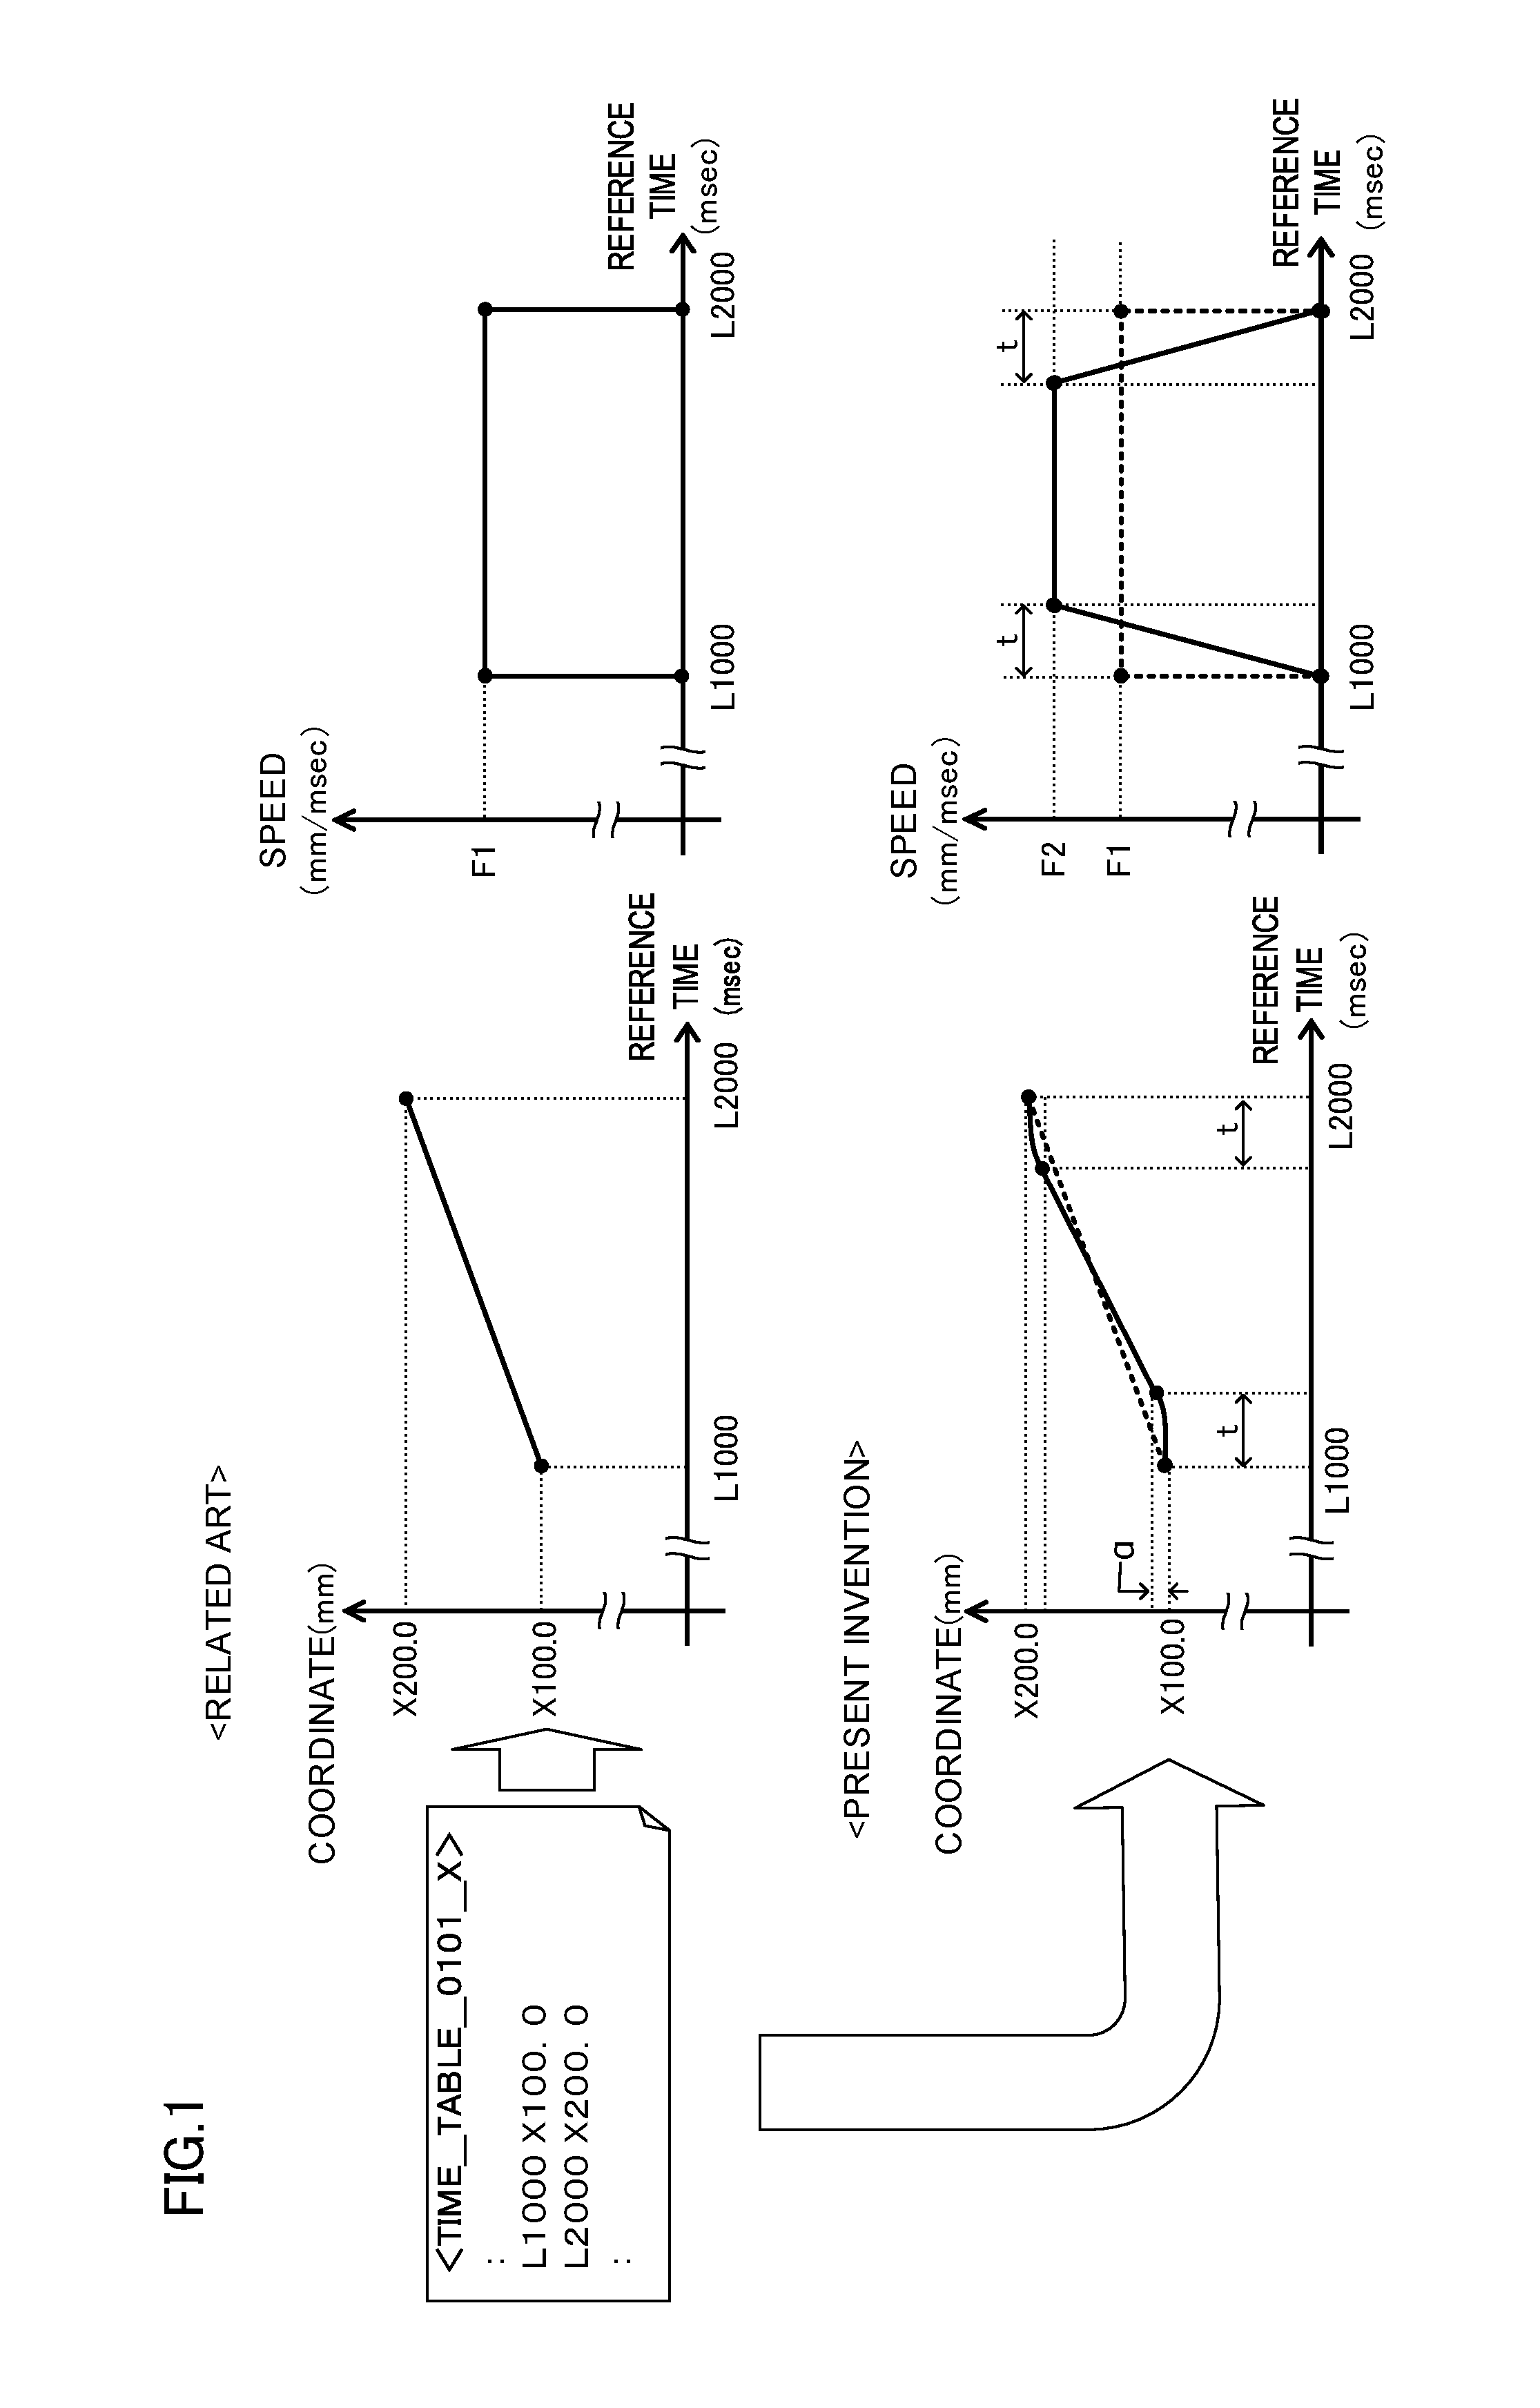 Numerical controller performing table-format-data-based operation